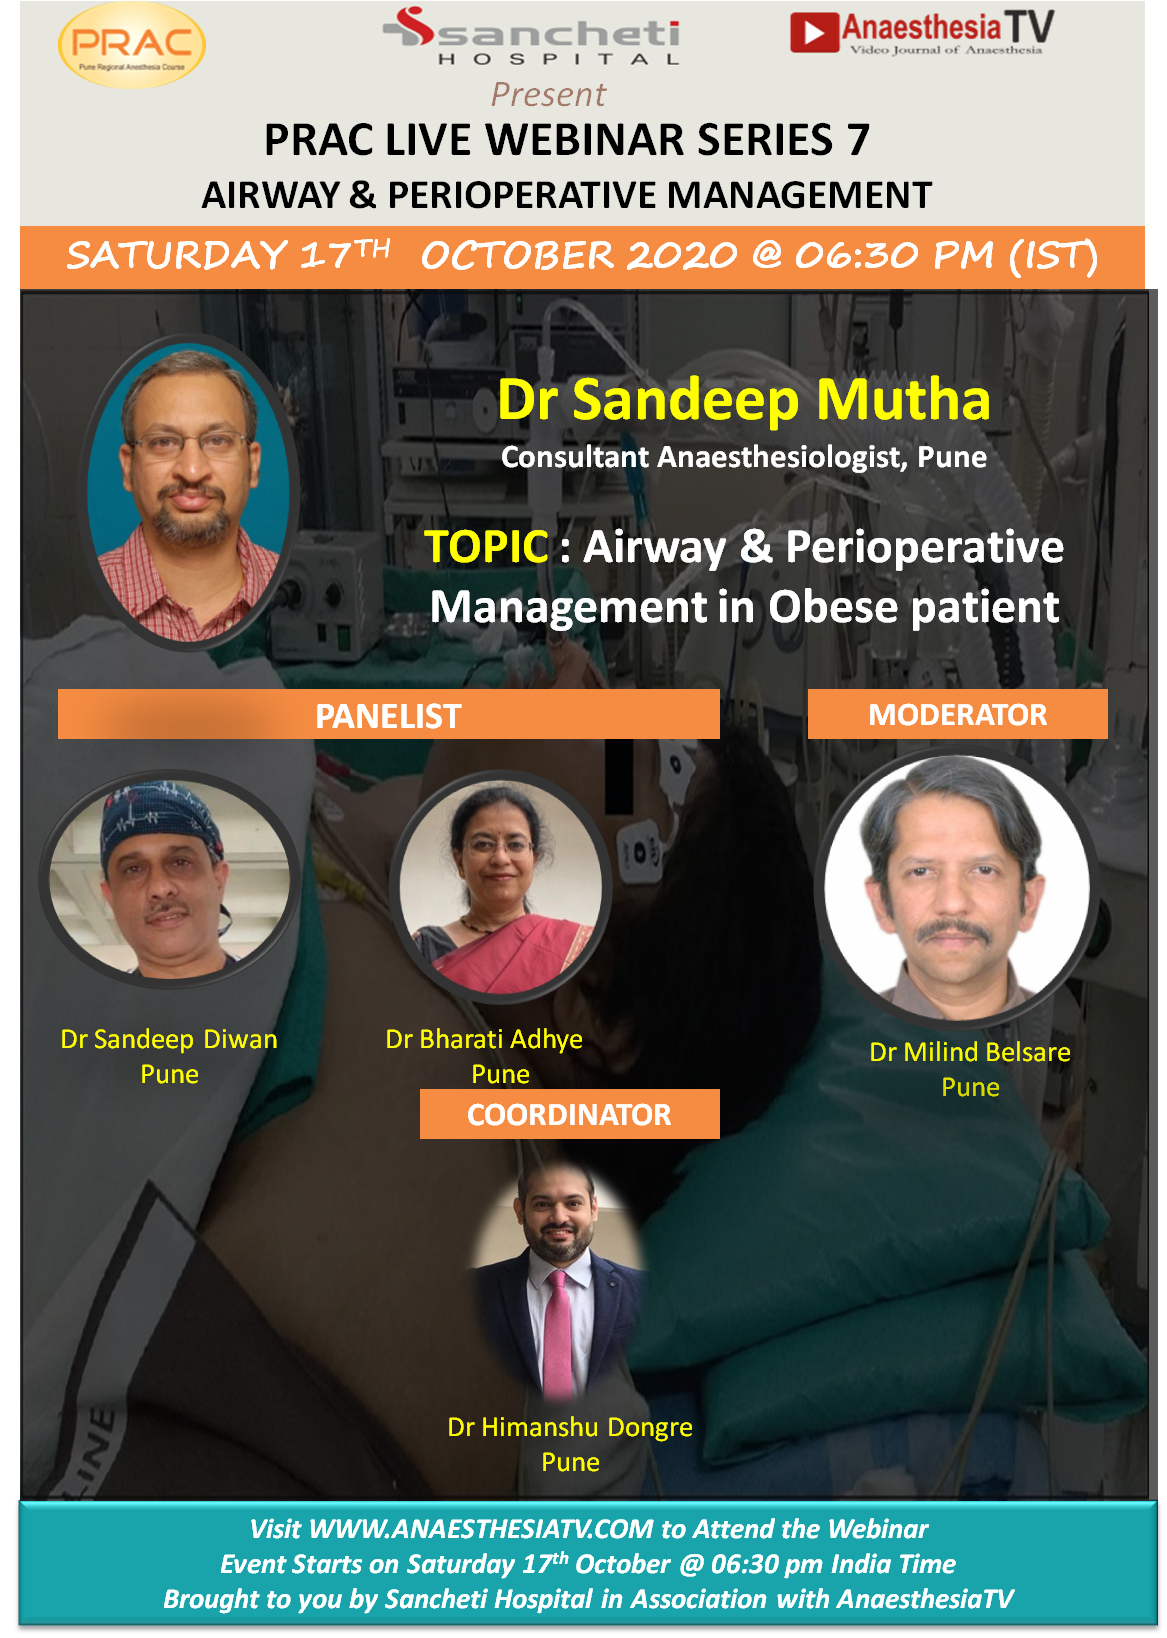 PRAC LIVE WEBINAR SERIES 7 : Airway & Perioperative Management in Obese patient by Dr Sandeep Mutha